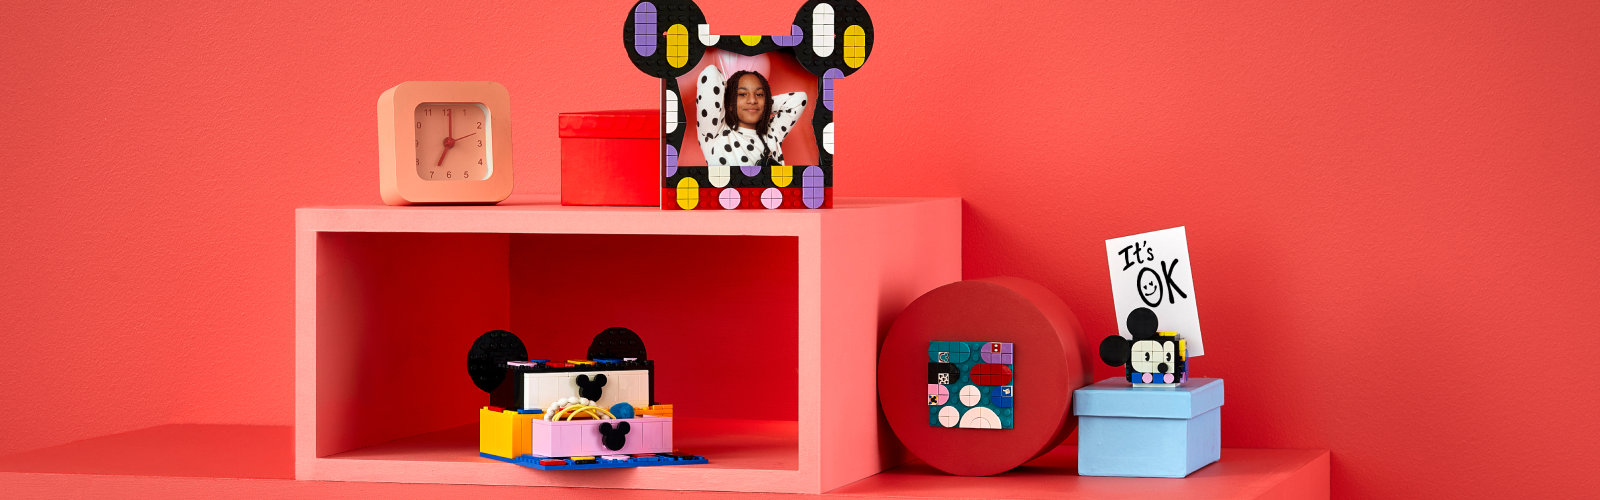 Decorate Your Home with LEGO® DOTS | Official LEGO® Shop SK